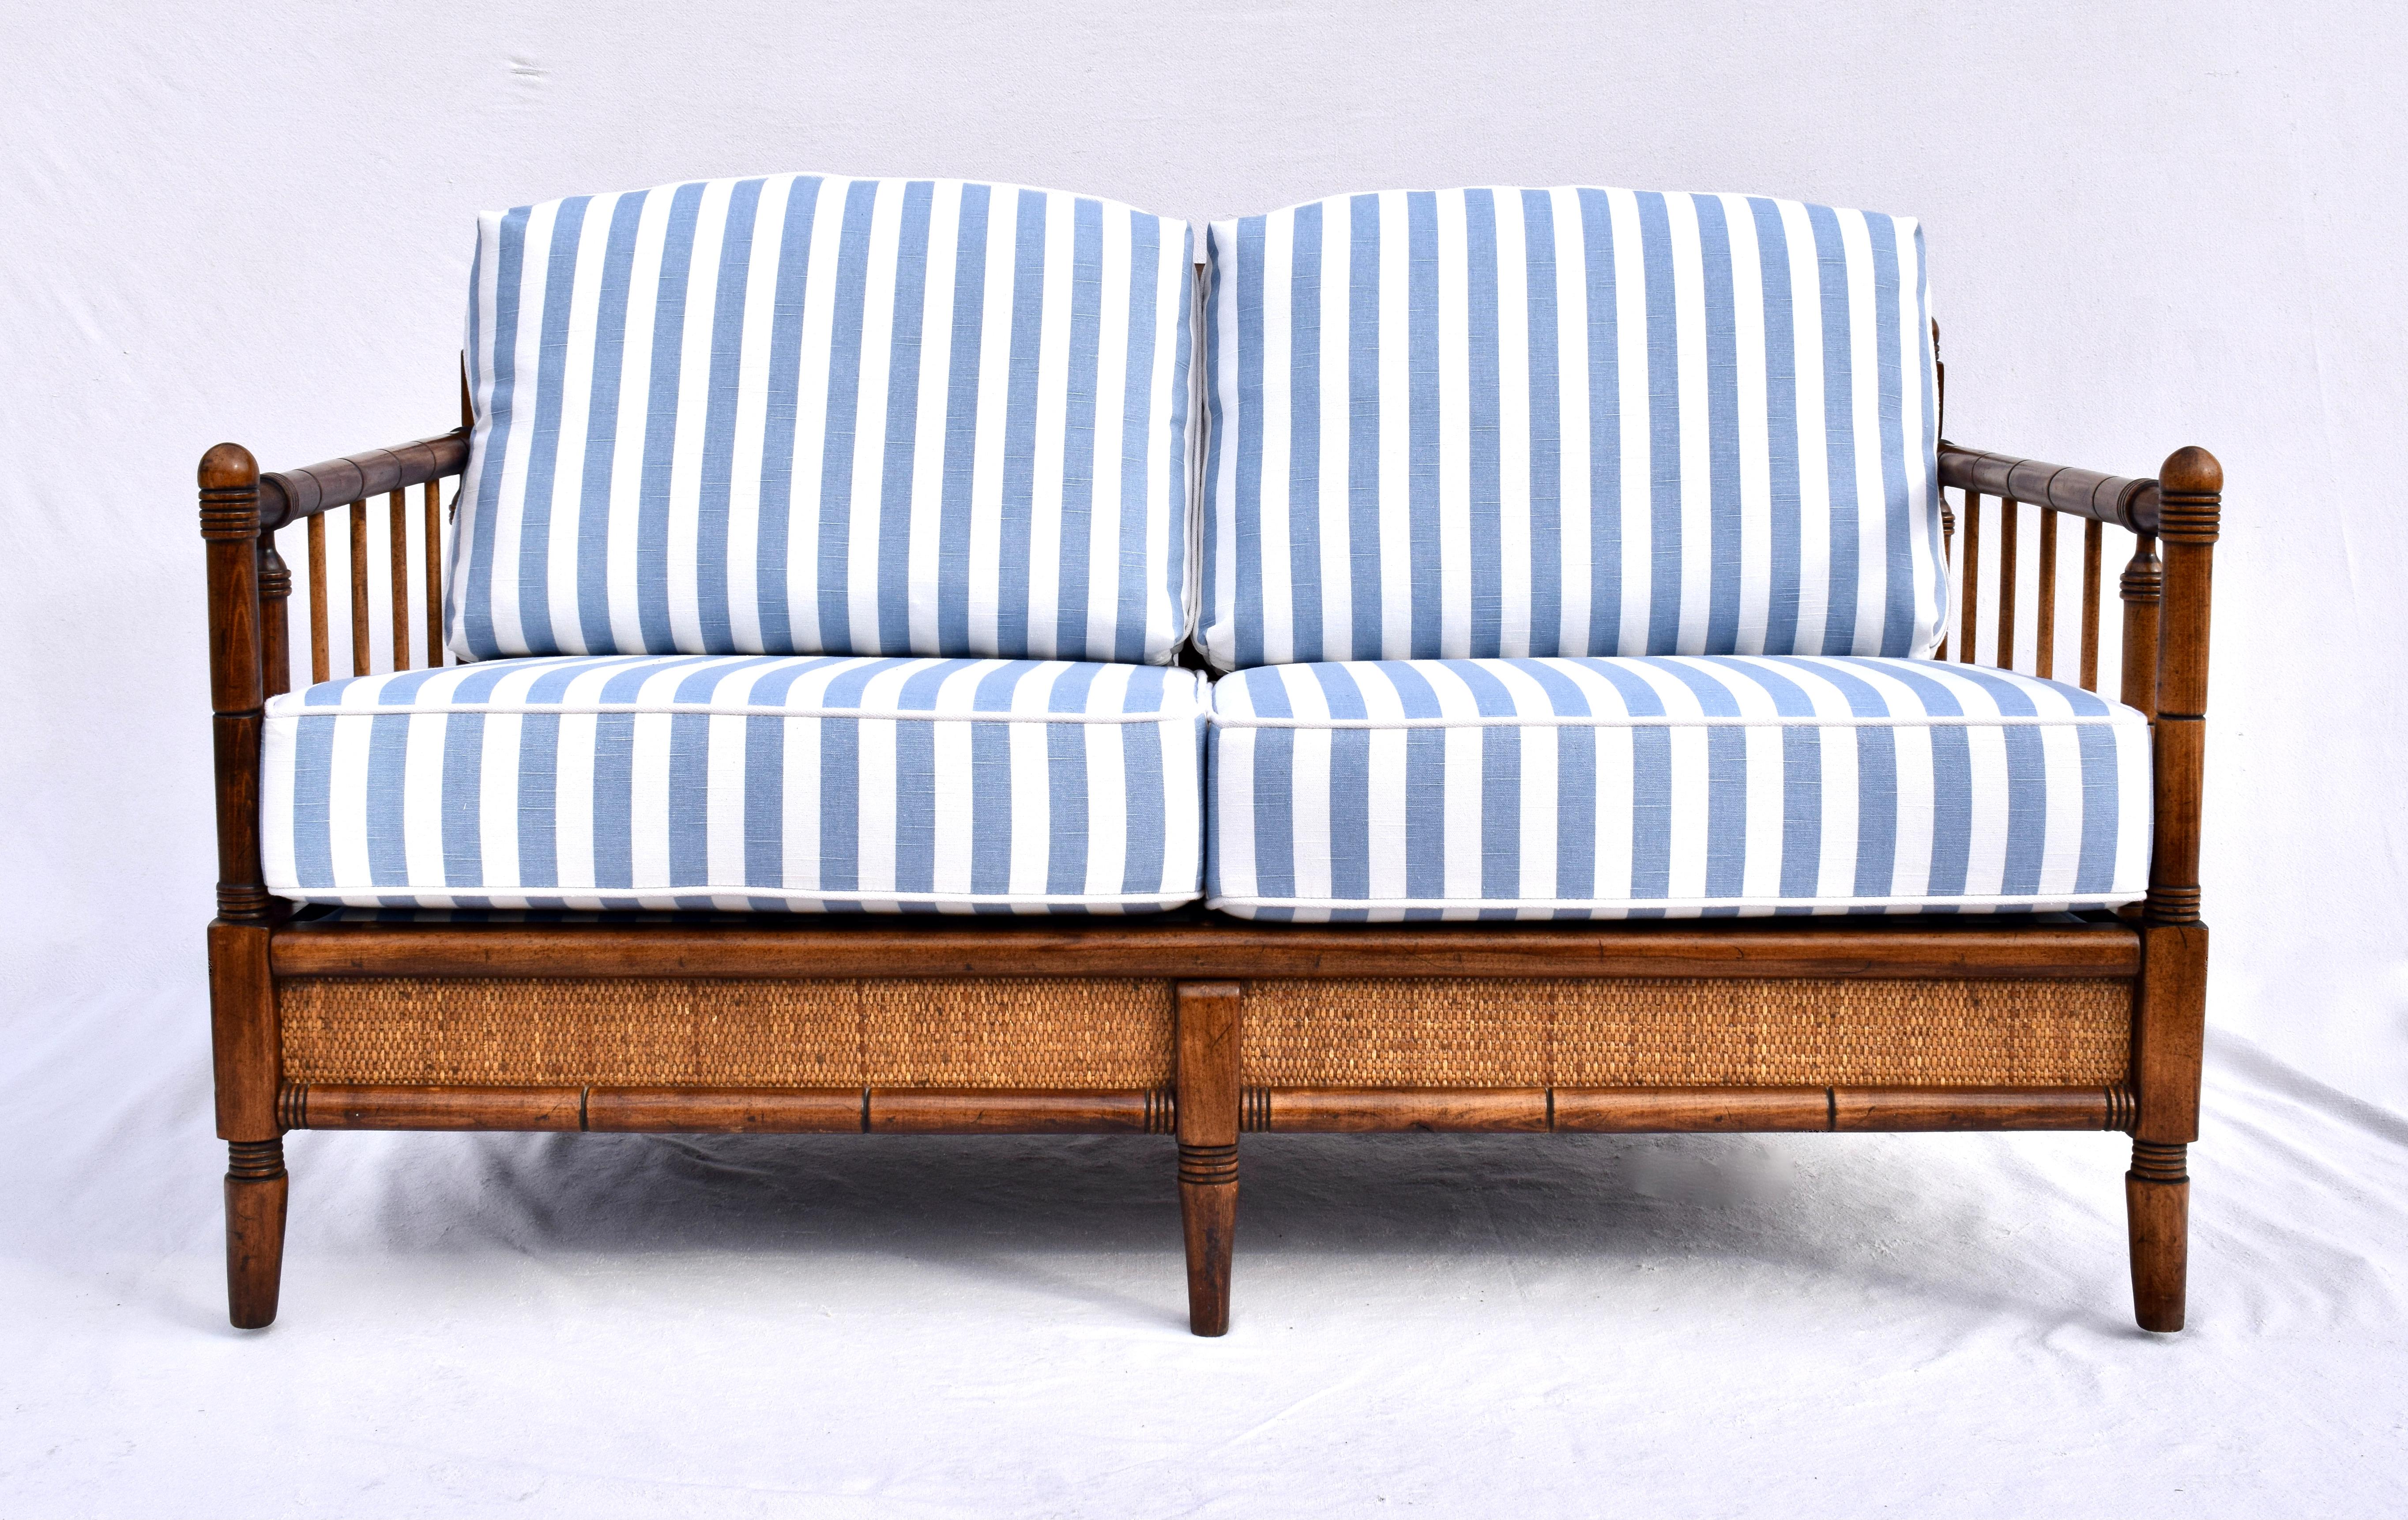 1950's Broyhill Premier loveseat with new custom cushions & upholstery. Solid wood construction and grasscloth surround, hand rubbed original finish with warm patina. Timeless design elements are especially suitable for casual & coastal settings.